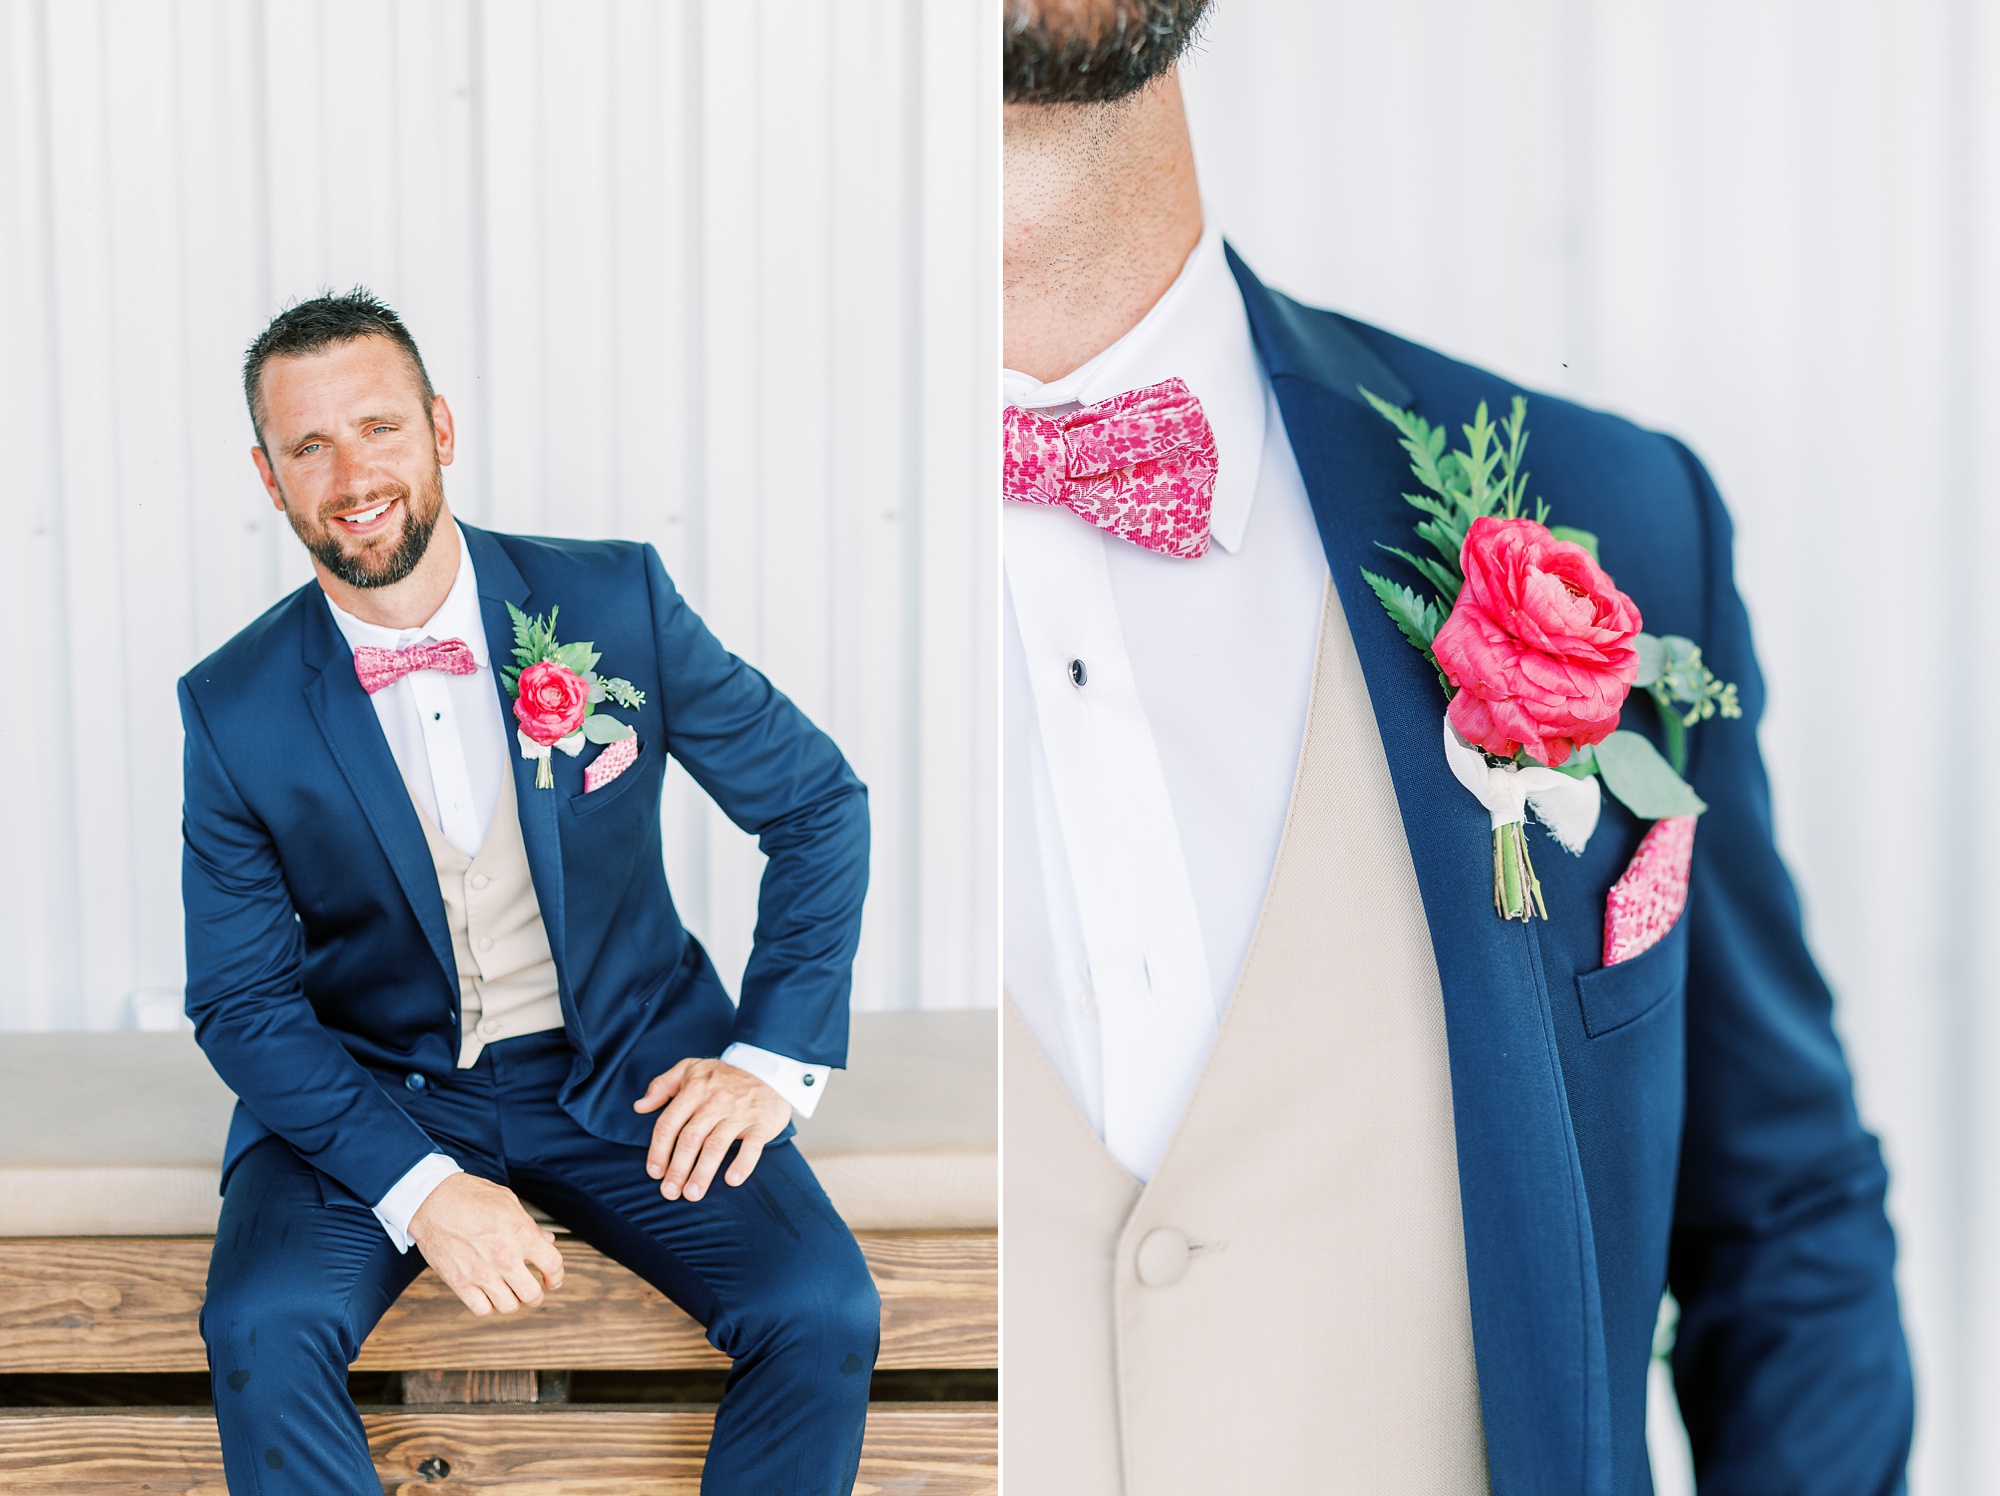 Southern look for the groom in navy blue suit